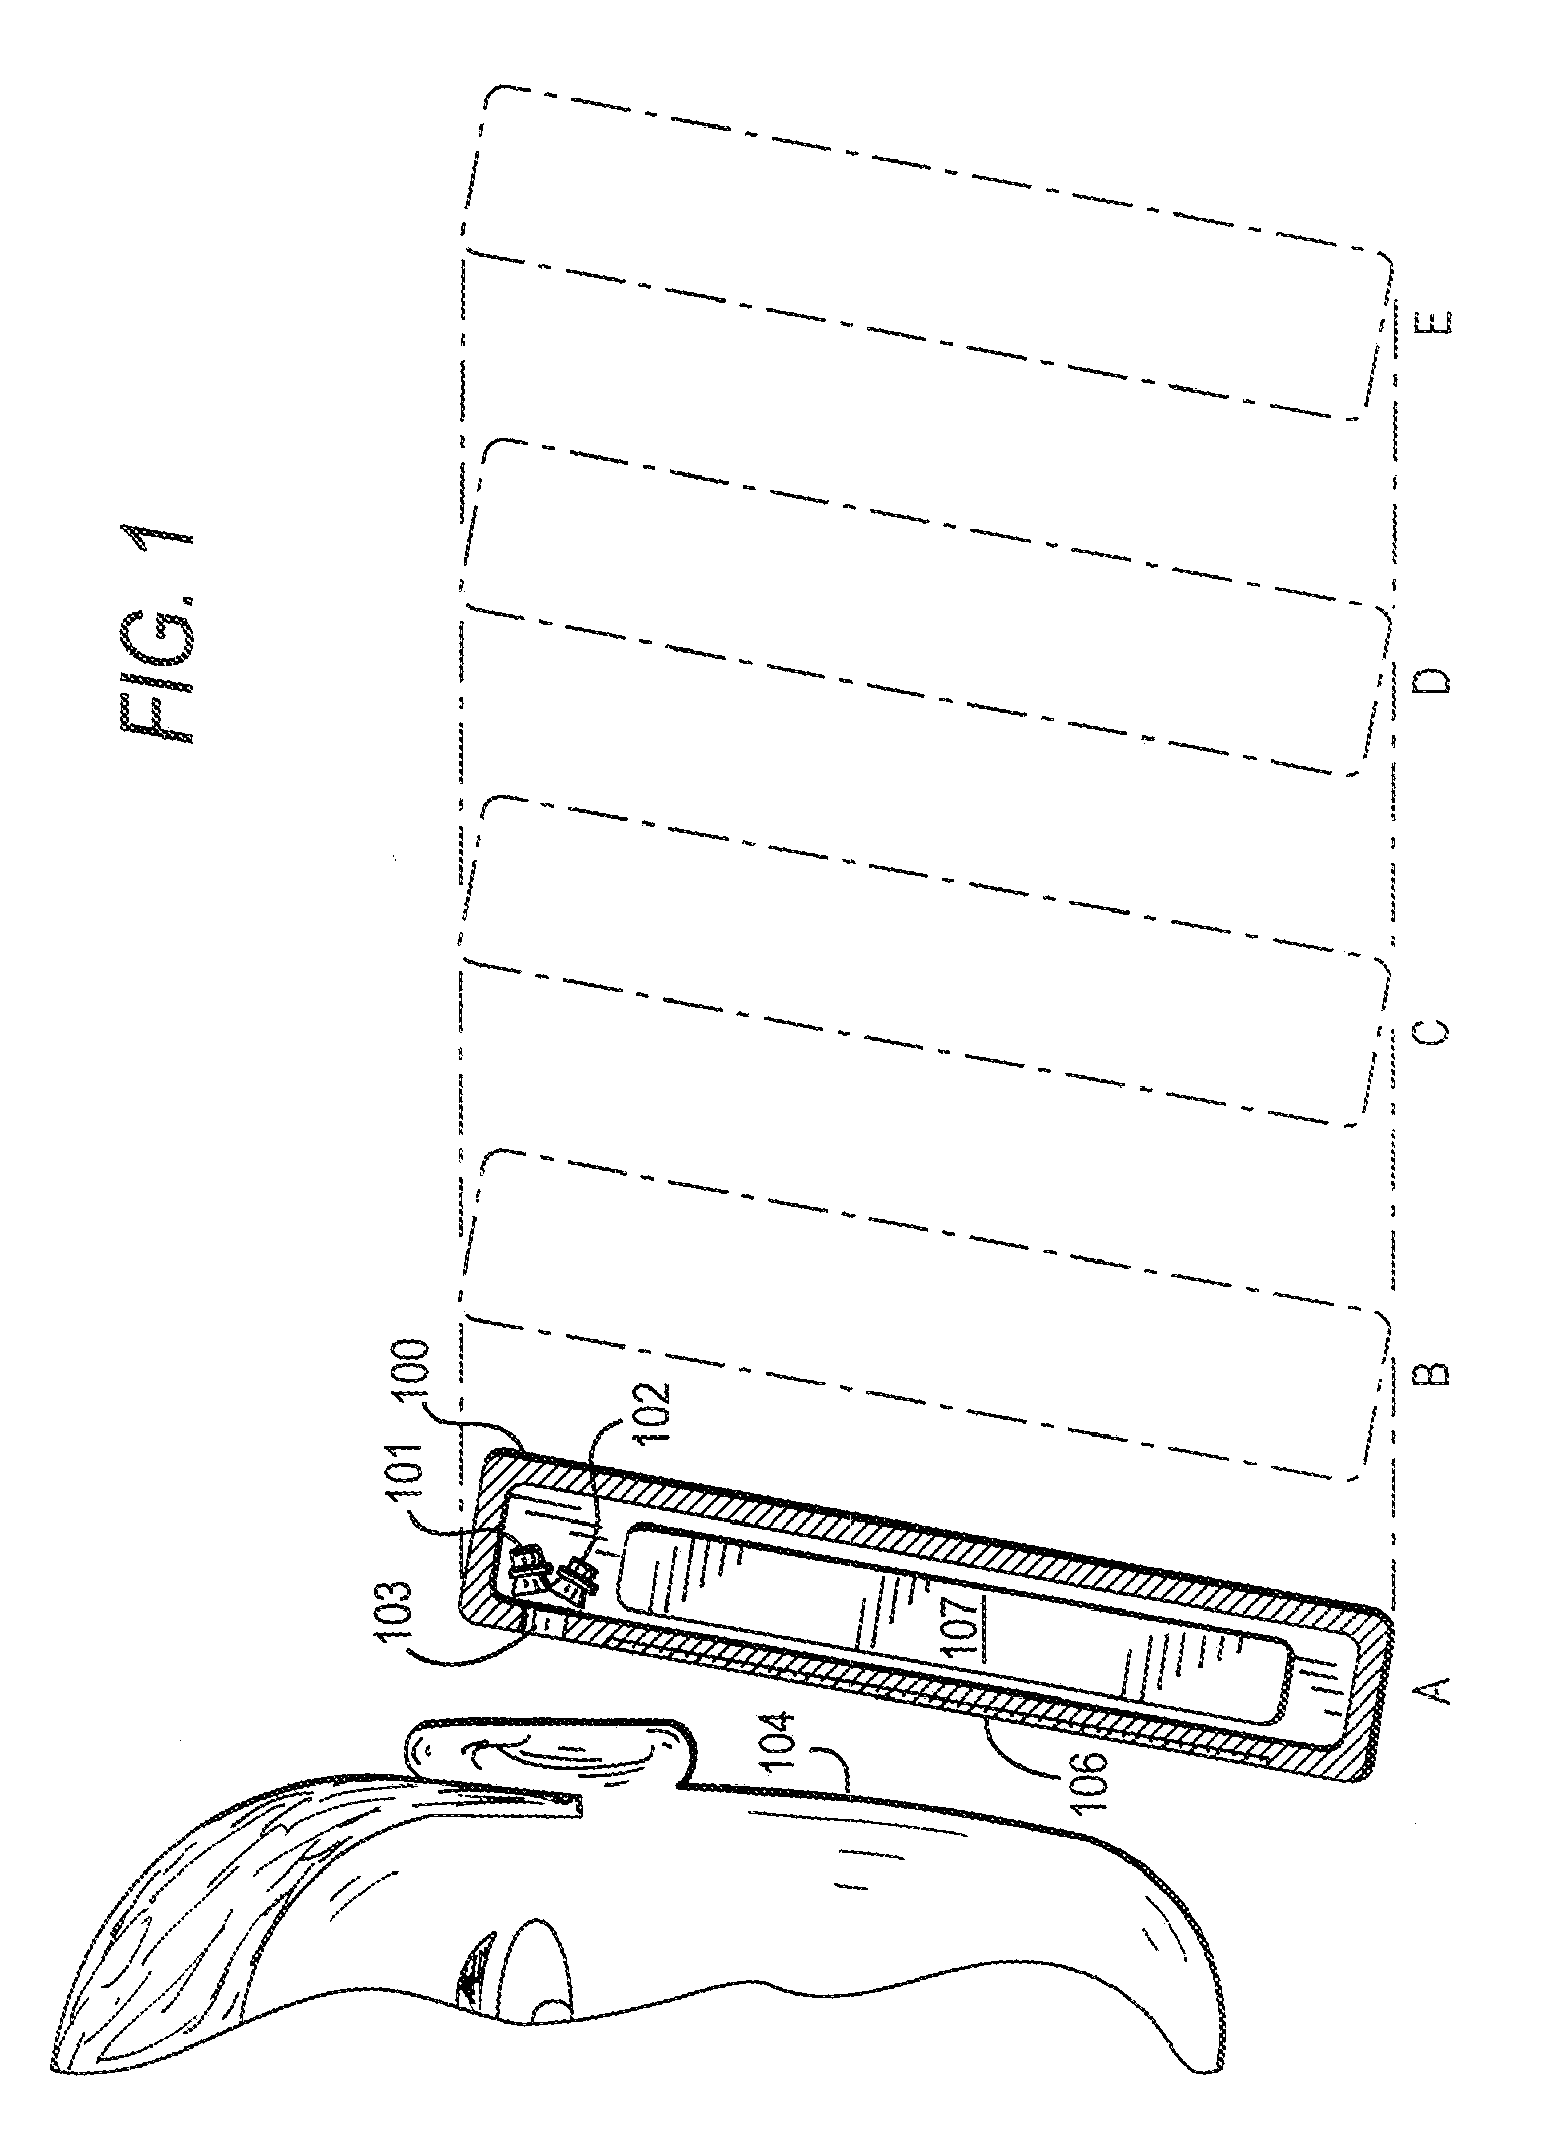 Adjustment of acoustic properties based on proximity detection